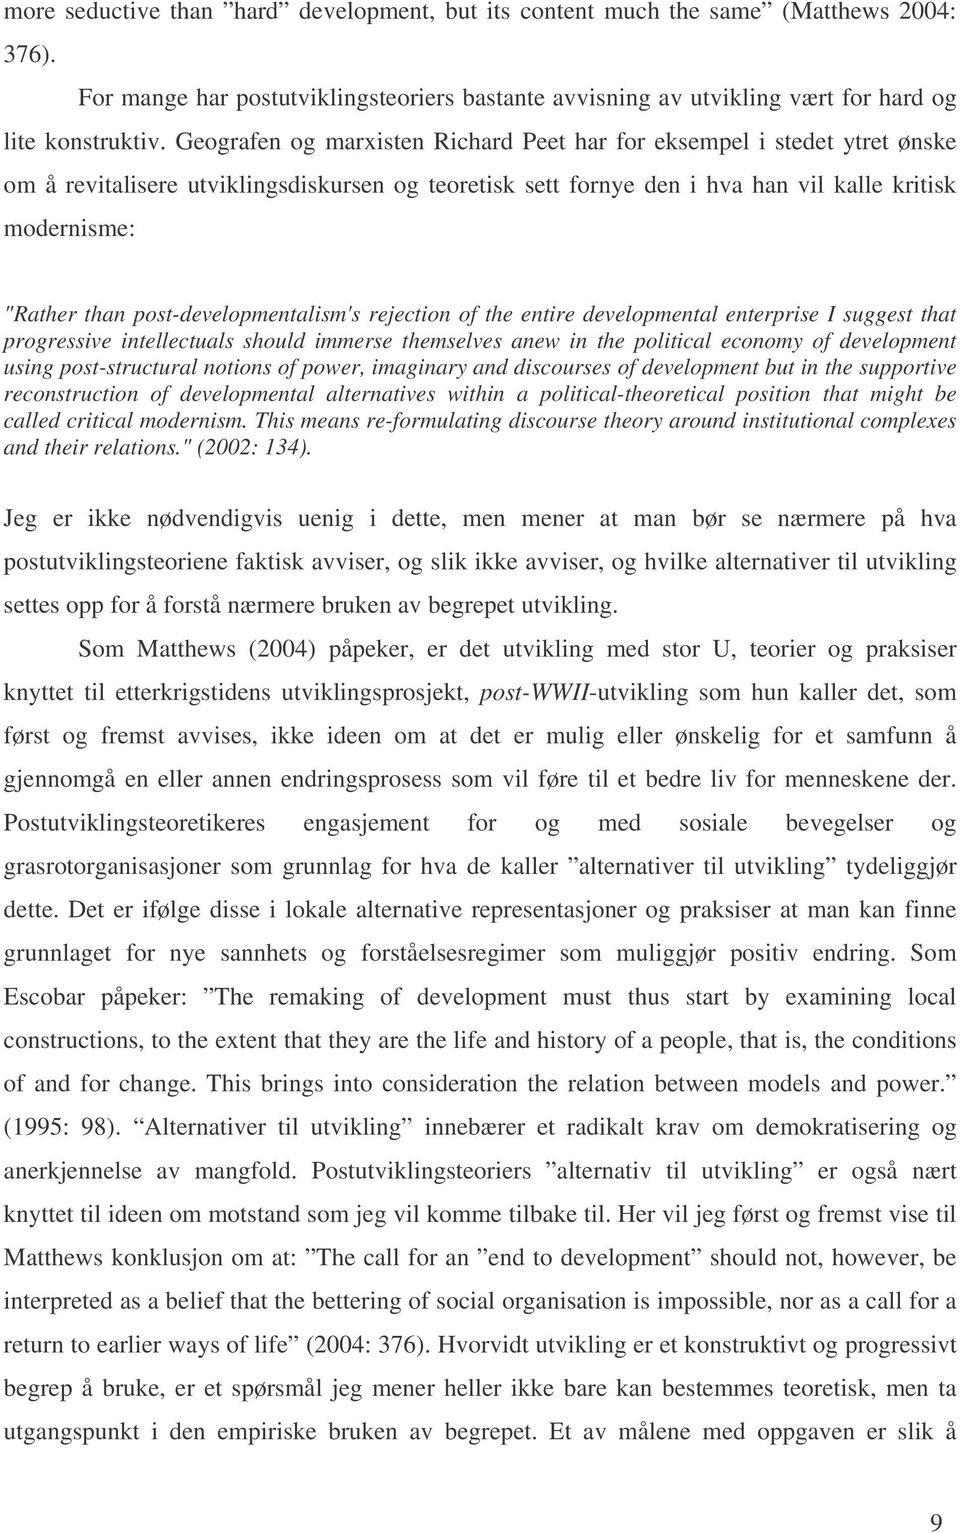 post-developmentalism's rejection of the entire developmental enterprise I suggest that progressive intellectuals should immerse themselves anew in the political economy of development using